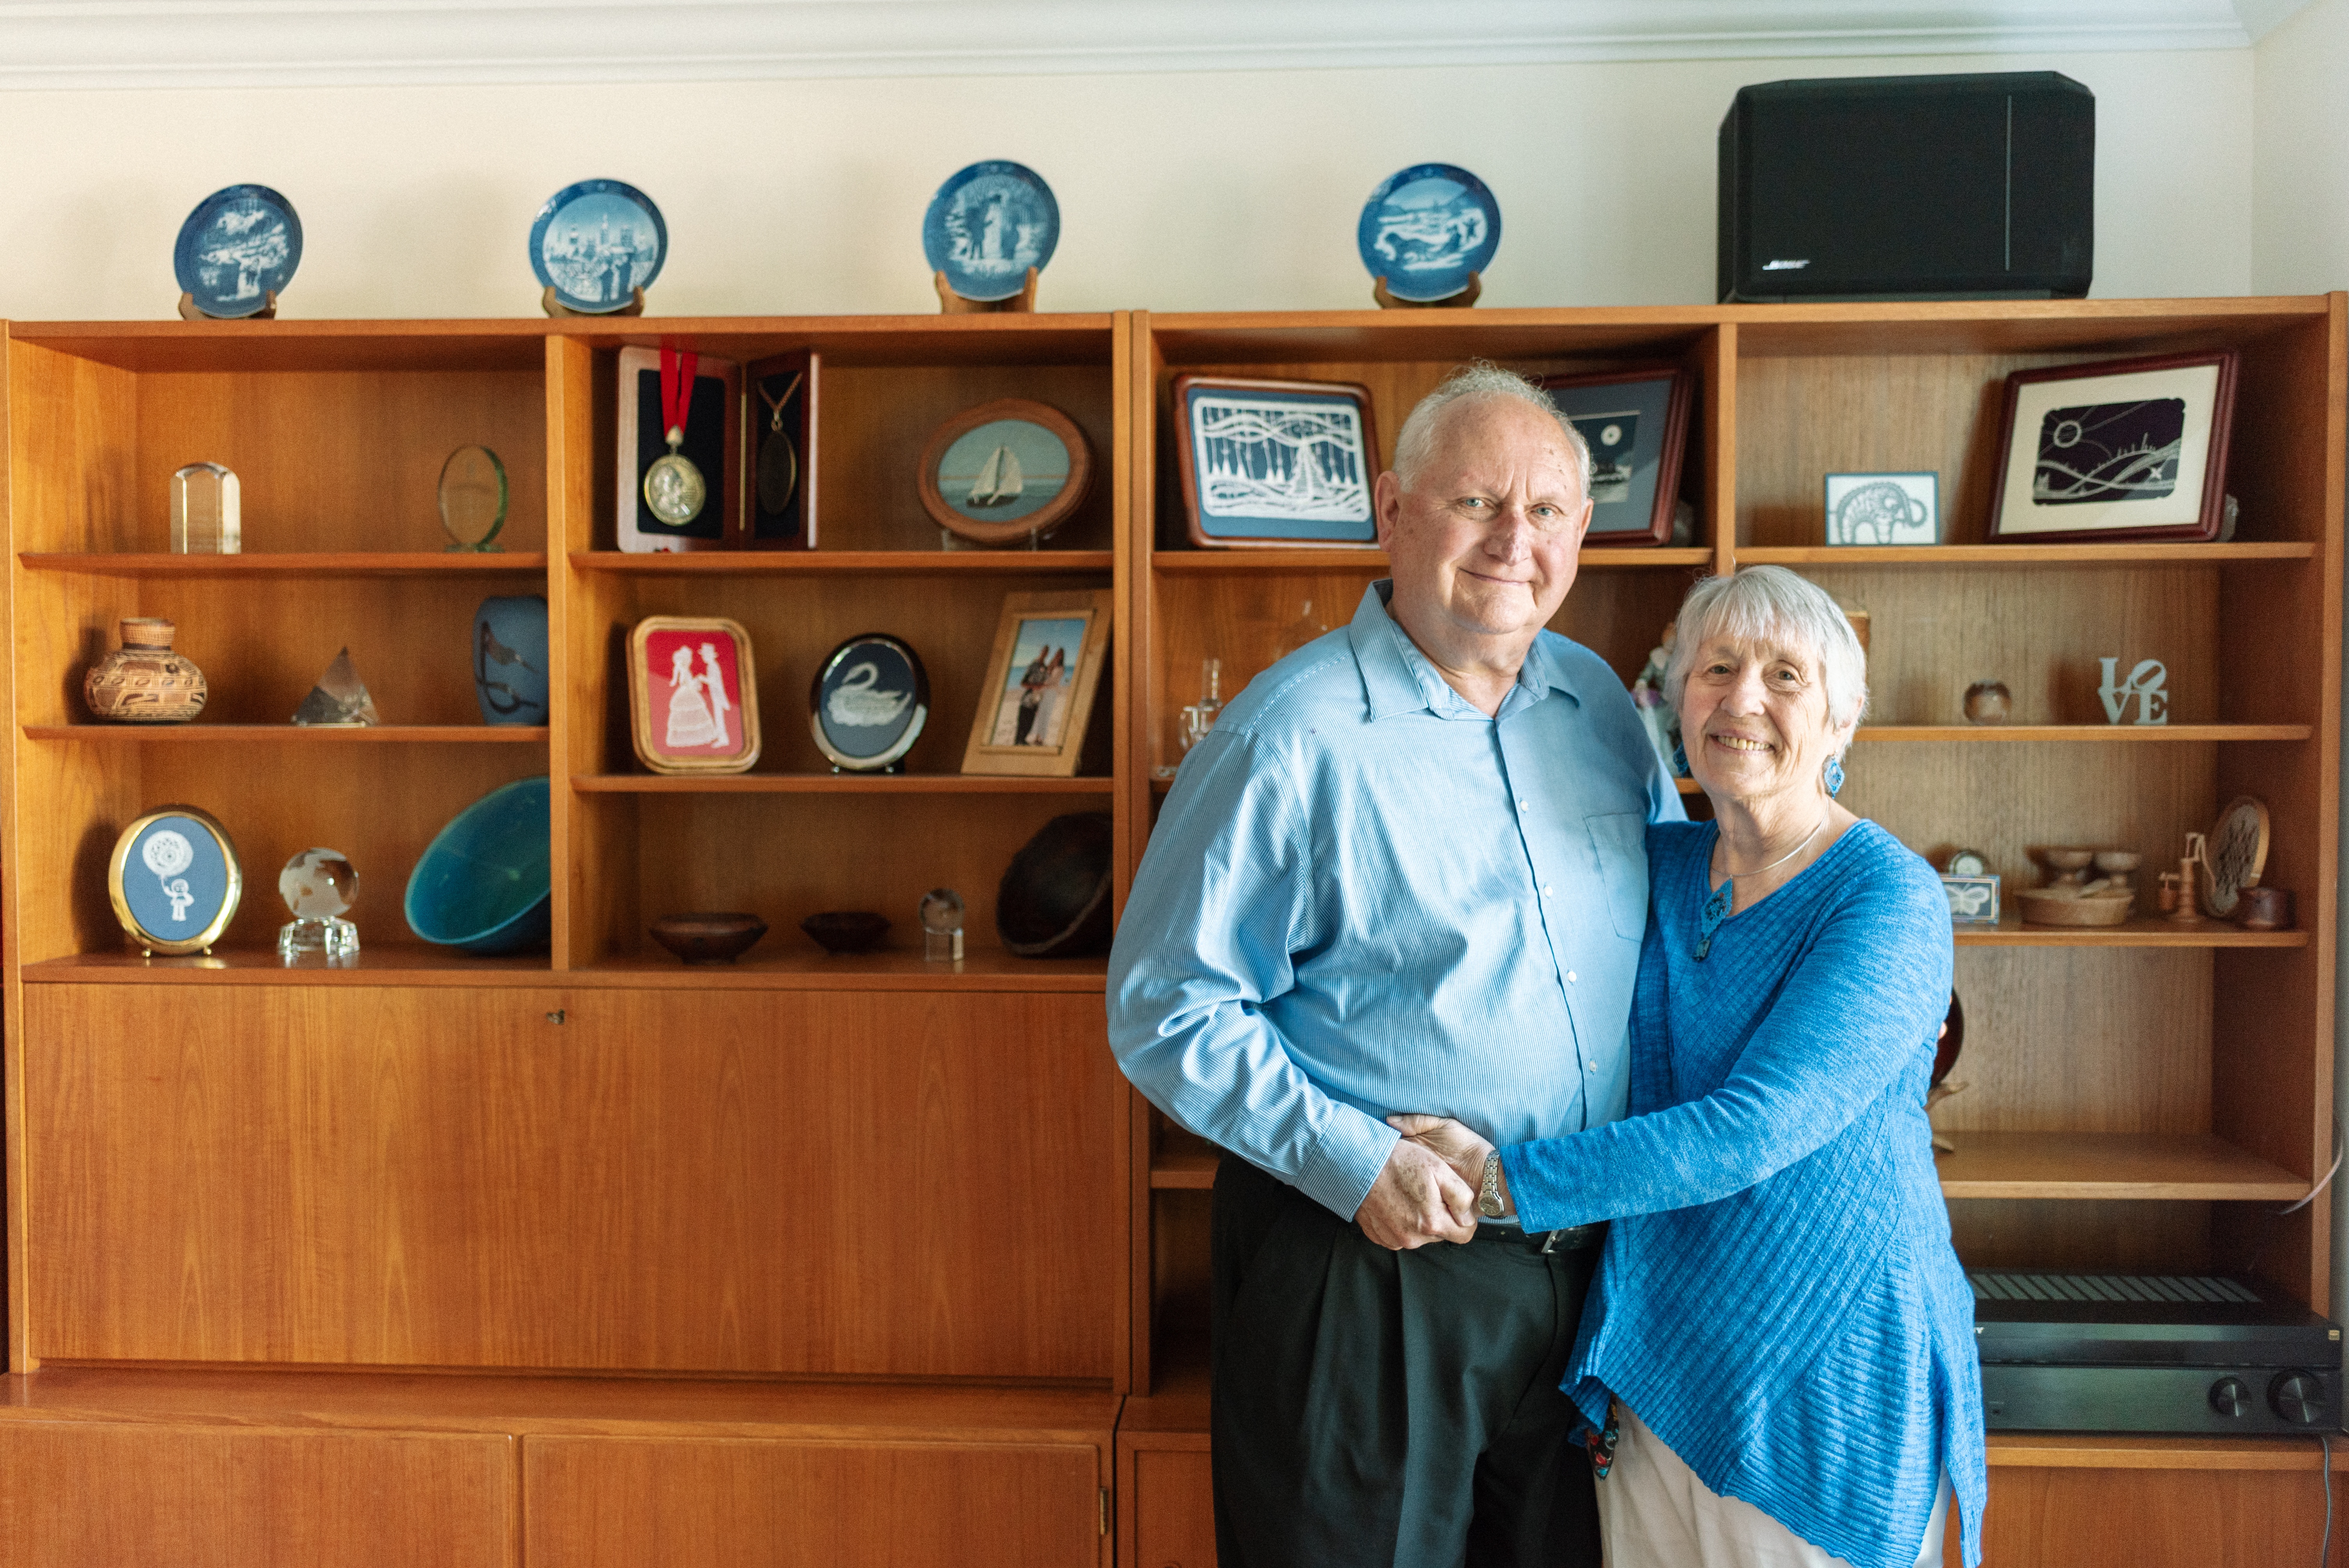 Bob and Karen stand side-by-side while embracing in front of a wooden shelving unit